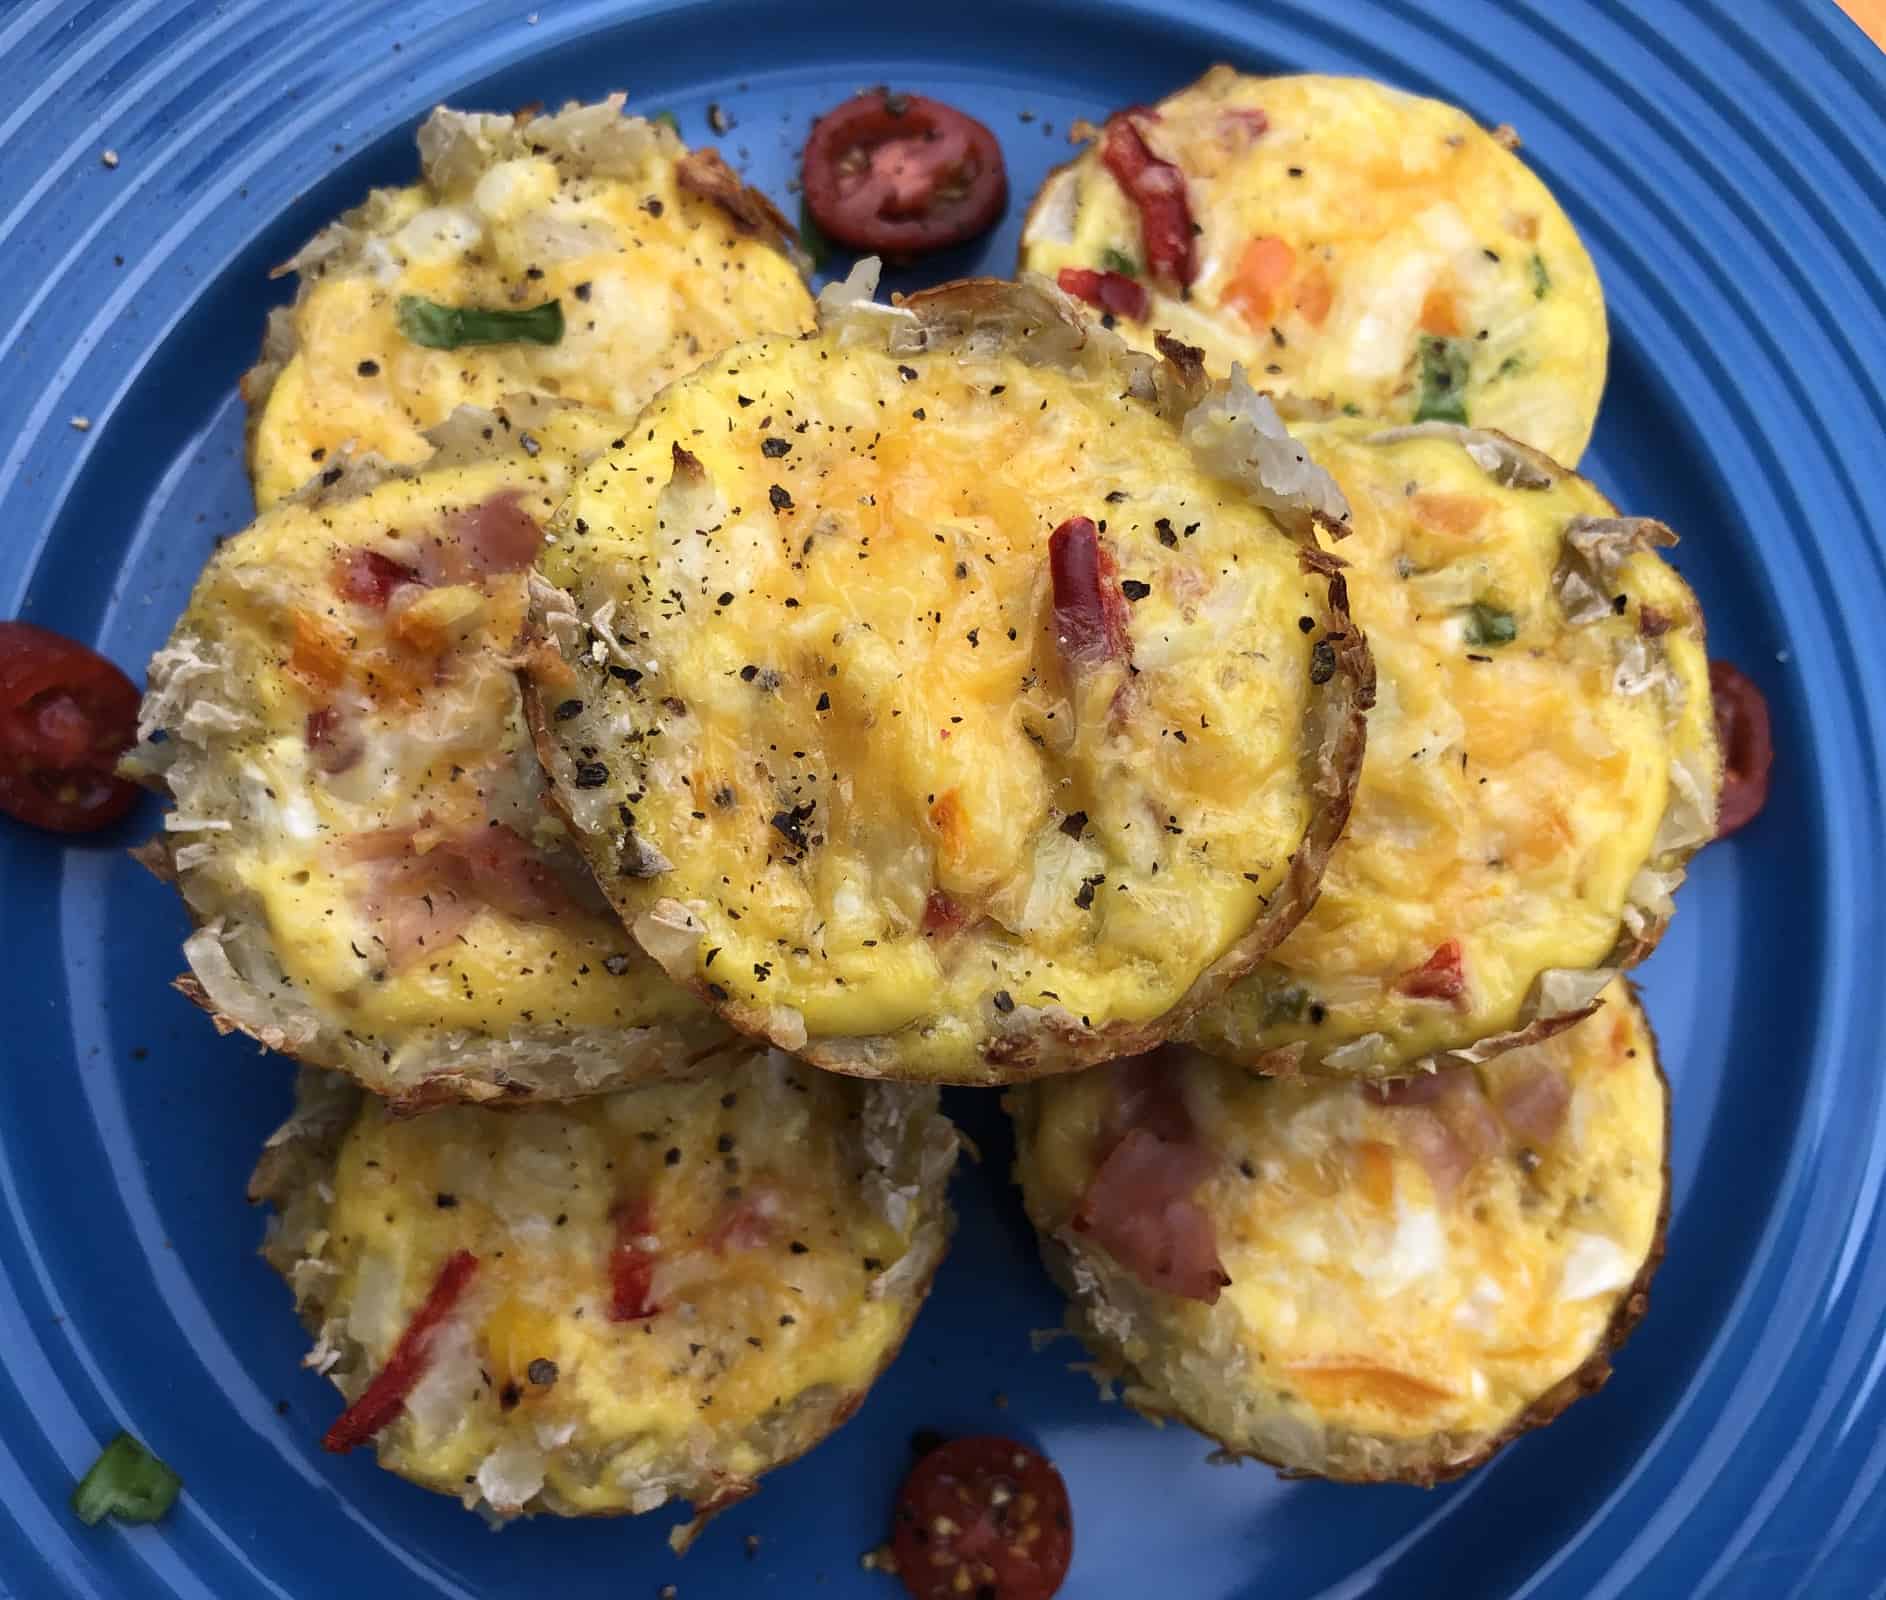 Seven mini veggie frittatas stacked on a blue plate with tomatoes